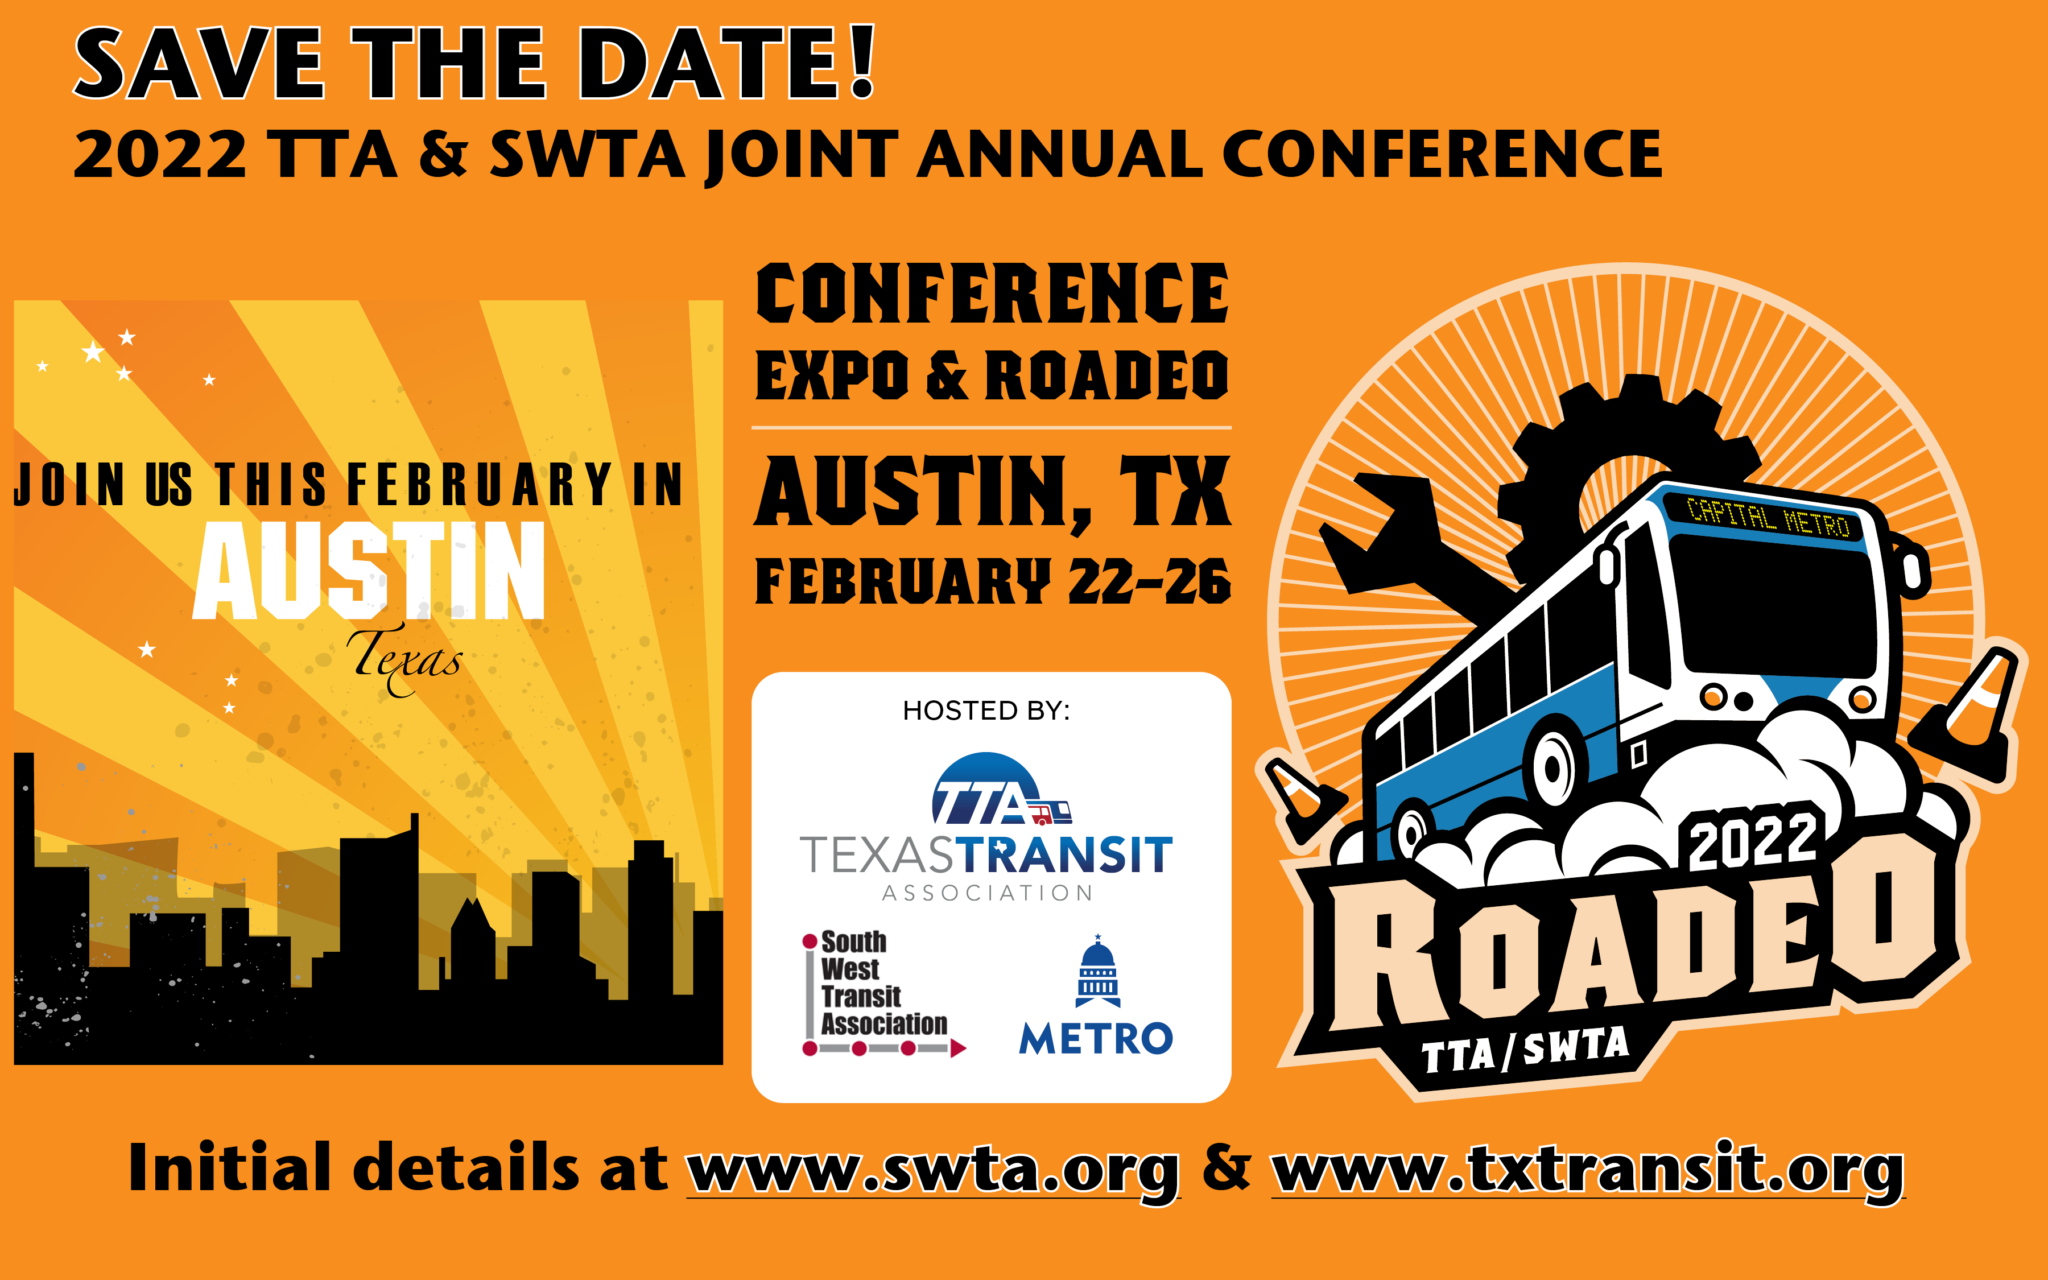 2022 SWTA/TTA Joint Annual Conference, Expo & State Roadeo Texas